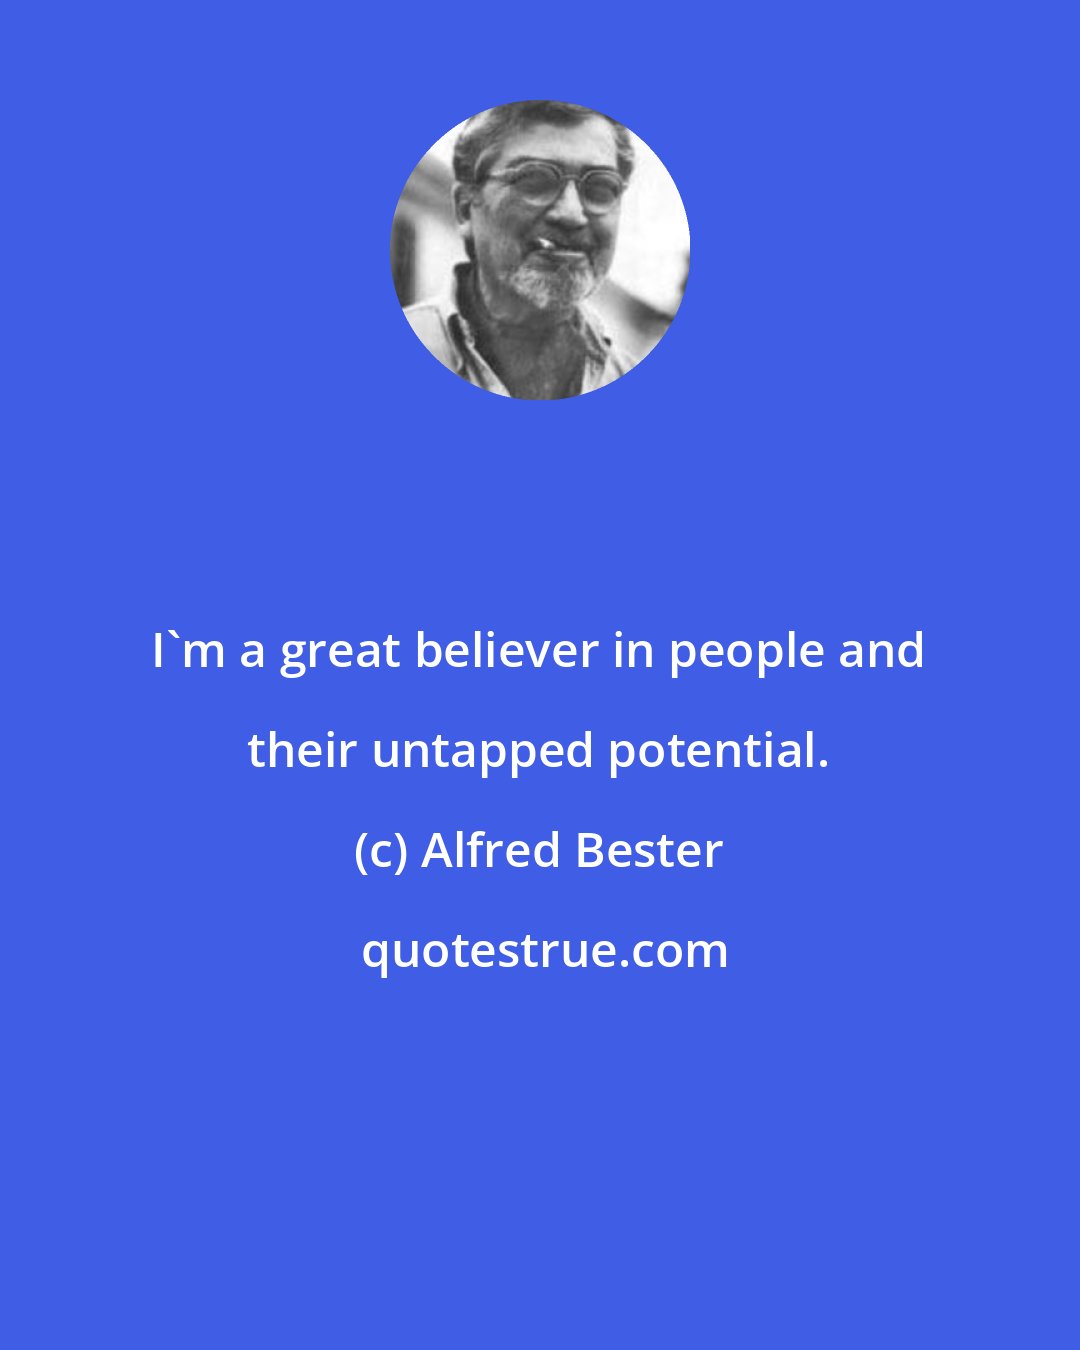 Alfred Bester: I'm a great believer in people and their untapped potential.